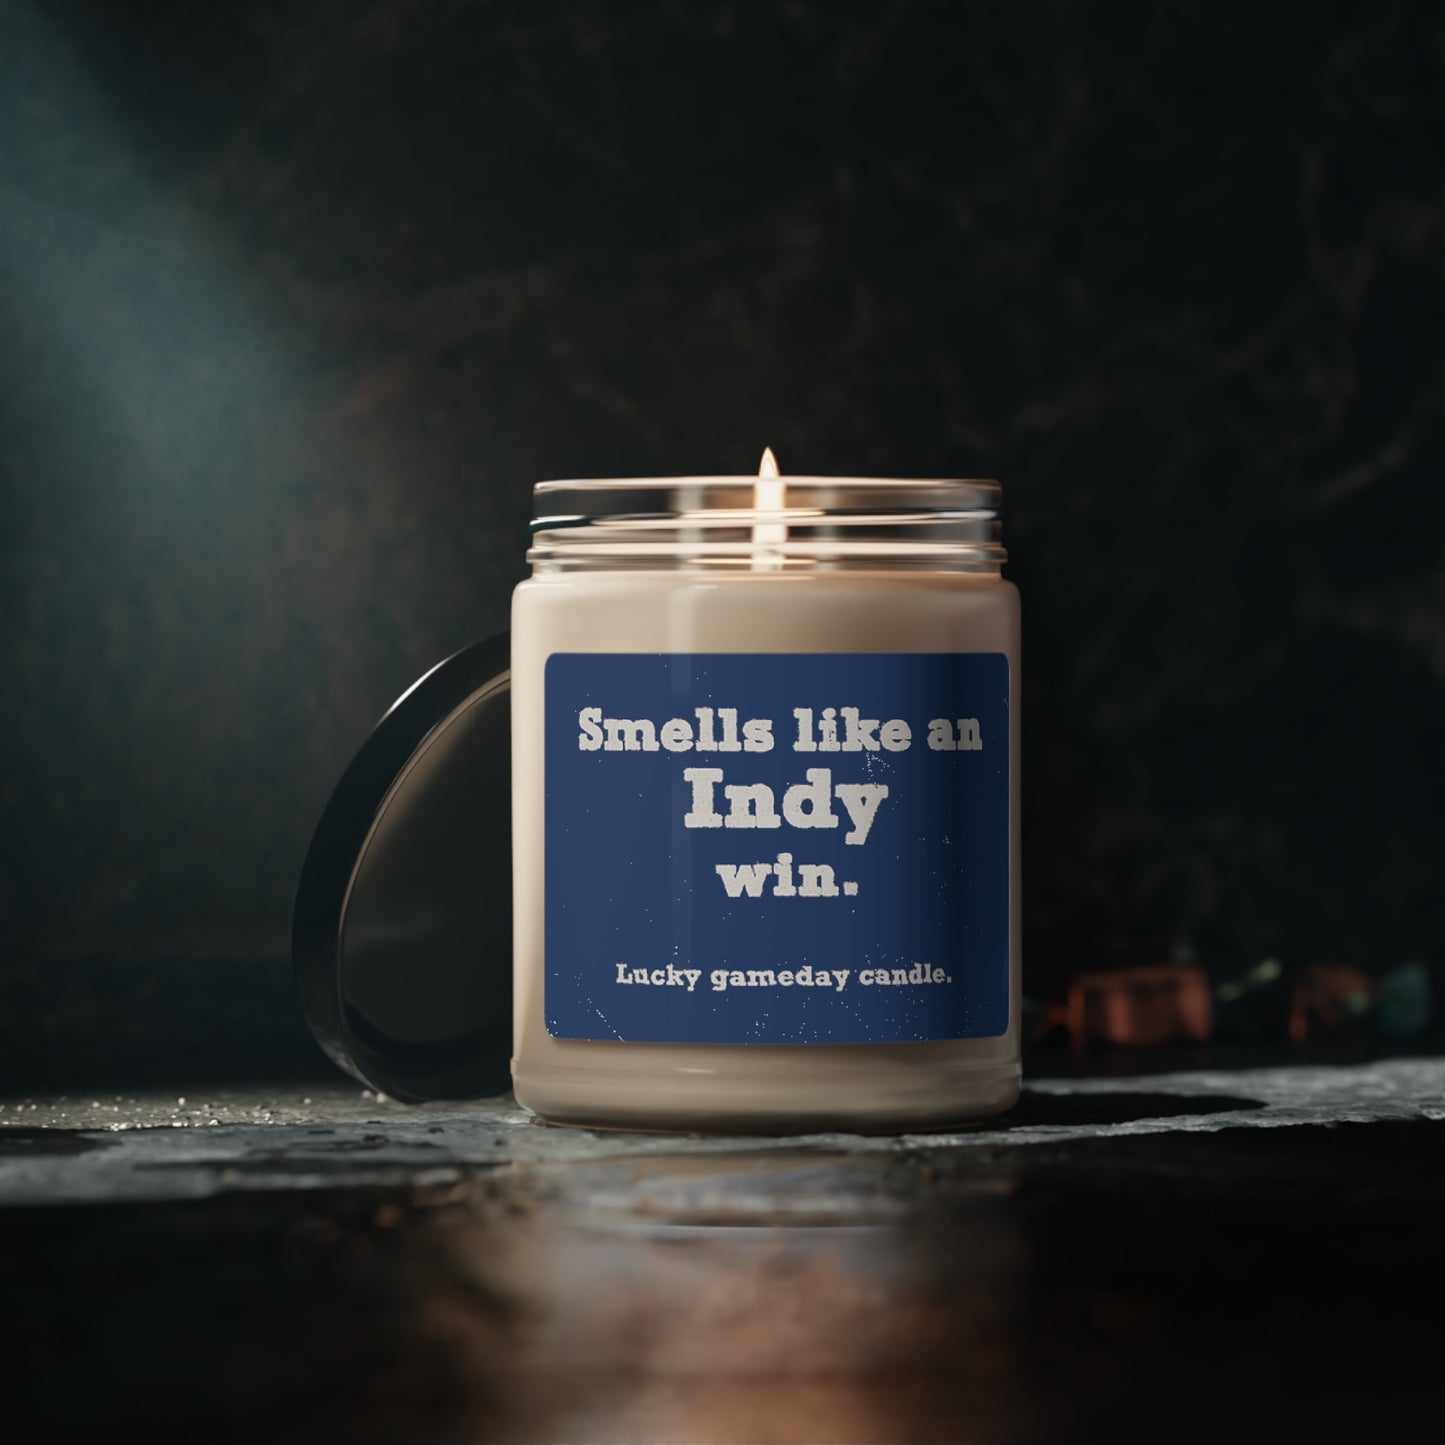 Indianapolis Football - "Smells Like a Indy Win" Scented Candle